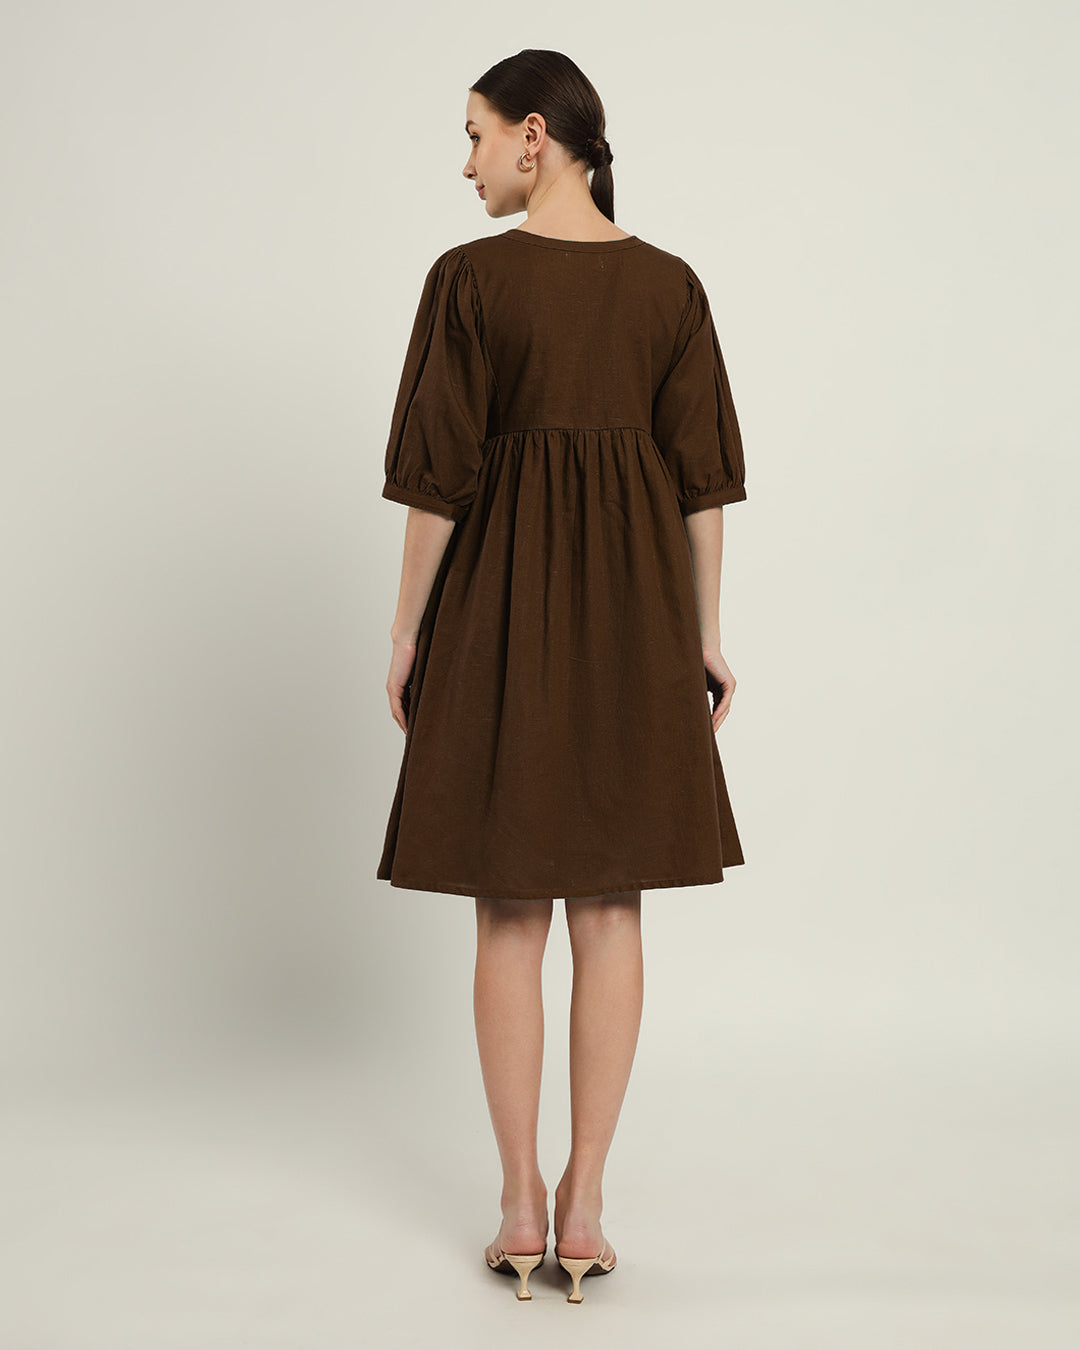 The Aira Nutshell Cotton Dress